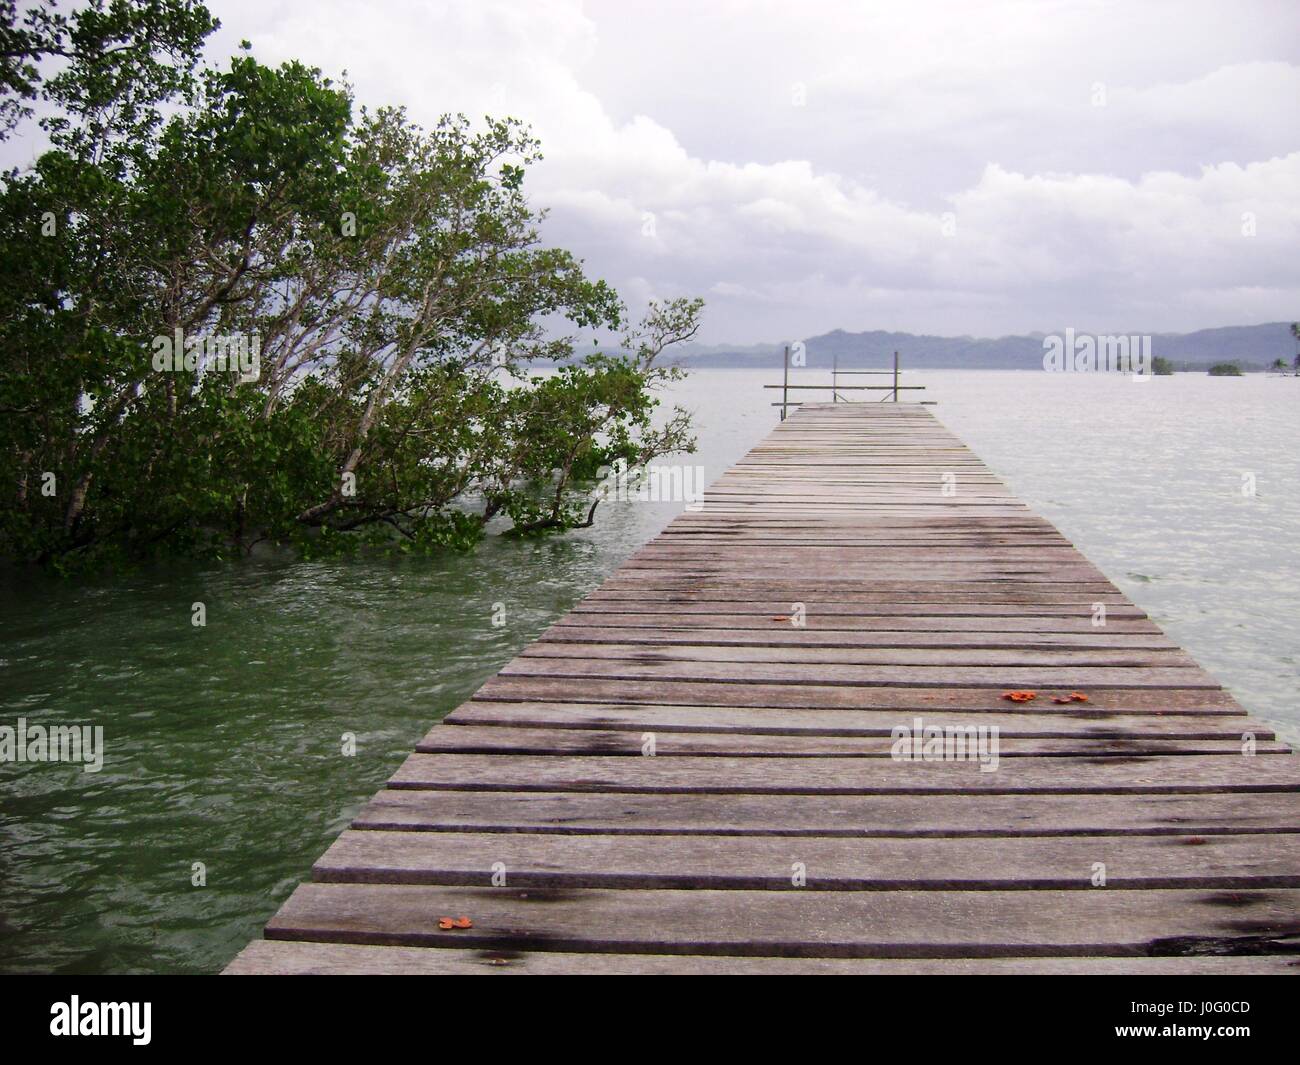 Wooden walkway on the beach, Philippines A wooden walkway in Kansilad, Lianga, Surigao del Sur Stock Photo